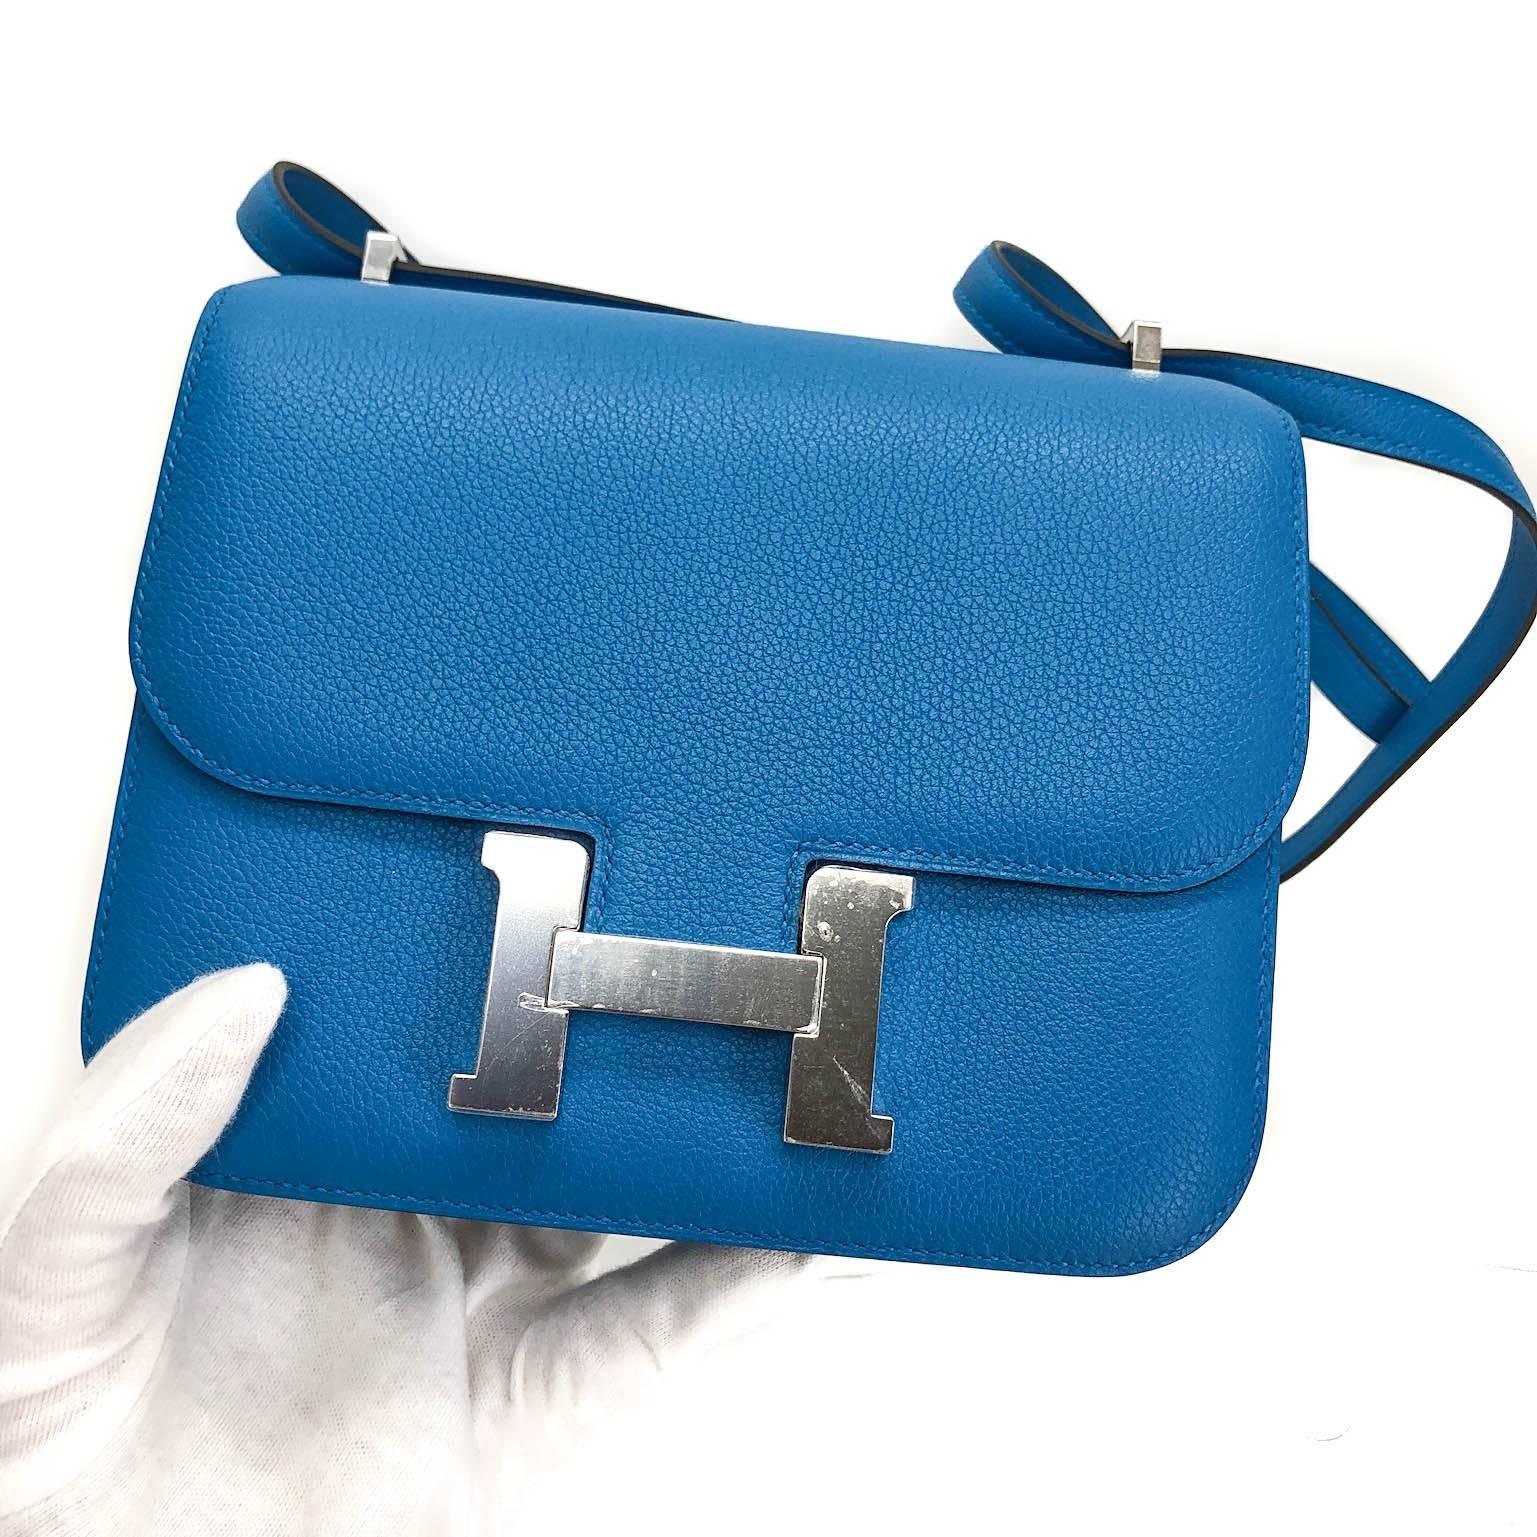 Mini bags are a perfect way to add a tasteful pop of color to your look. In Evercolor leather, this Hermes Constance 18 cross-body cutie is a great option when you need to carry a few essentials, but don't want to be weighed down.

Bag is in